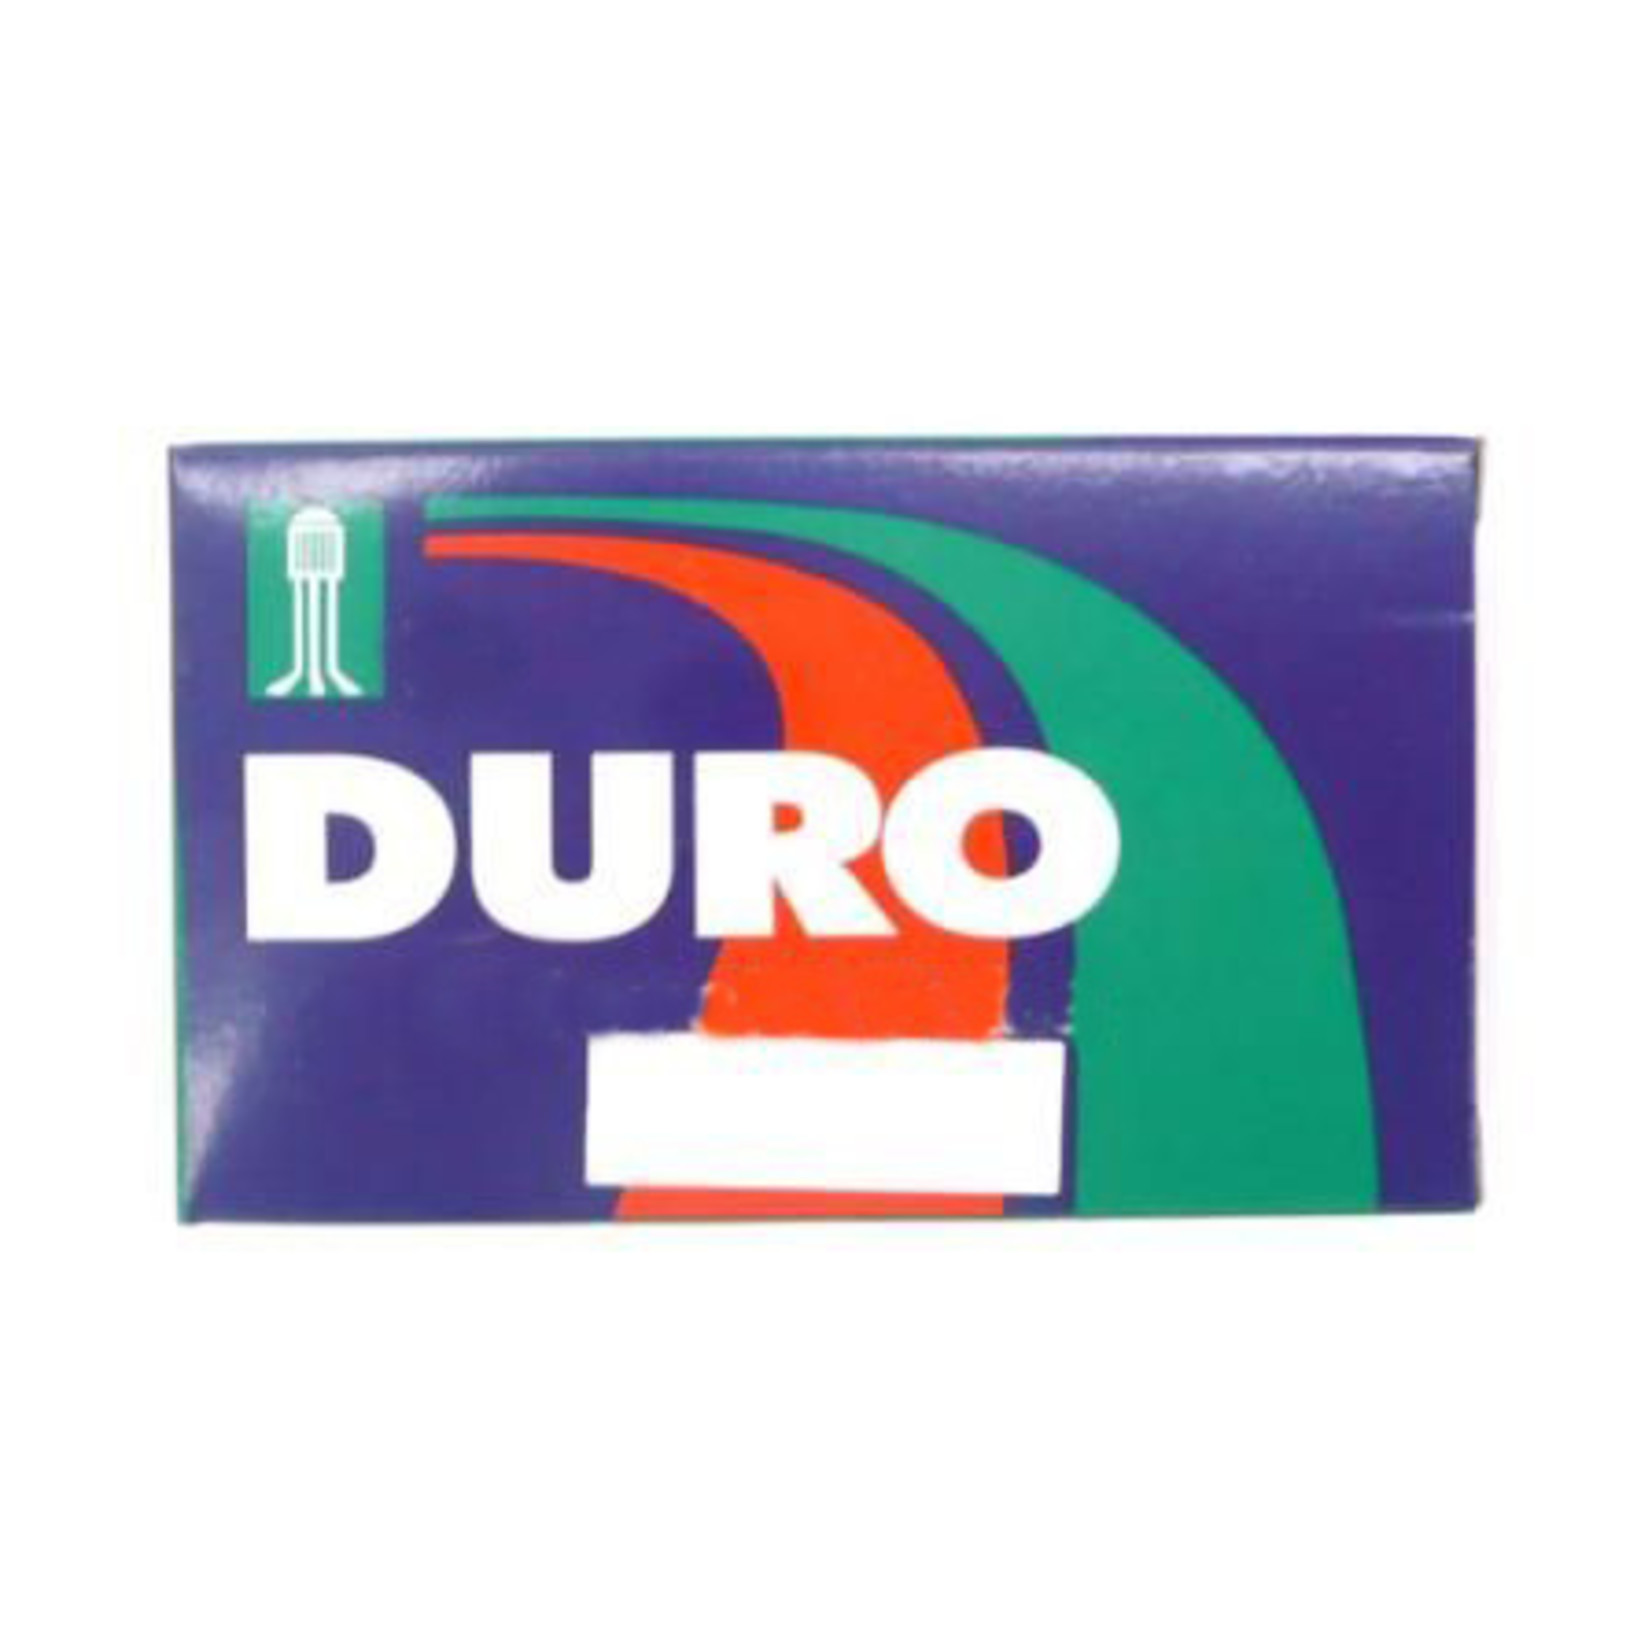 Duro Duro Bicycle Tube - 700 X 19/23C F/V 52mm - Thickness 0.45mm Extra Light - Pair